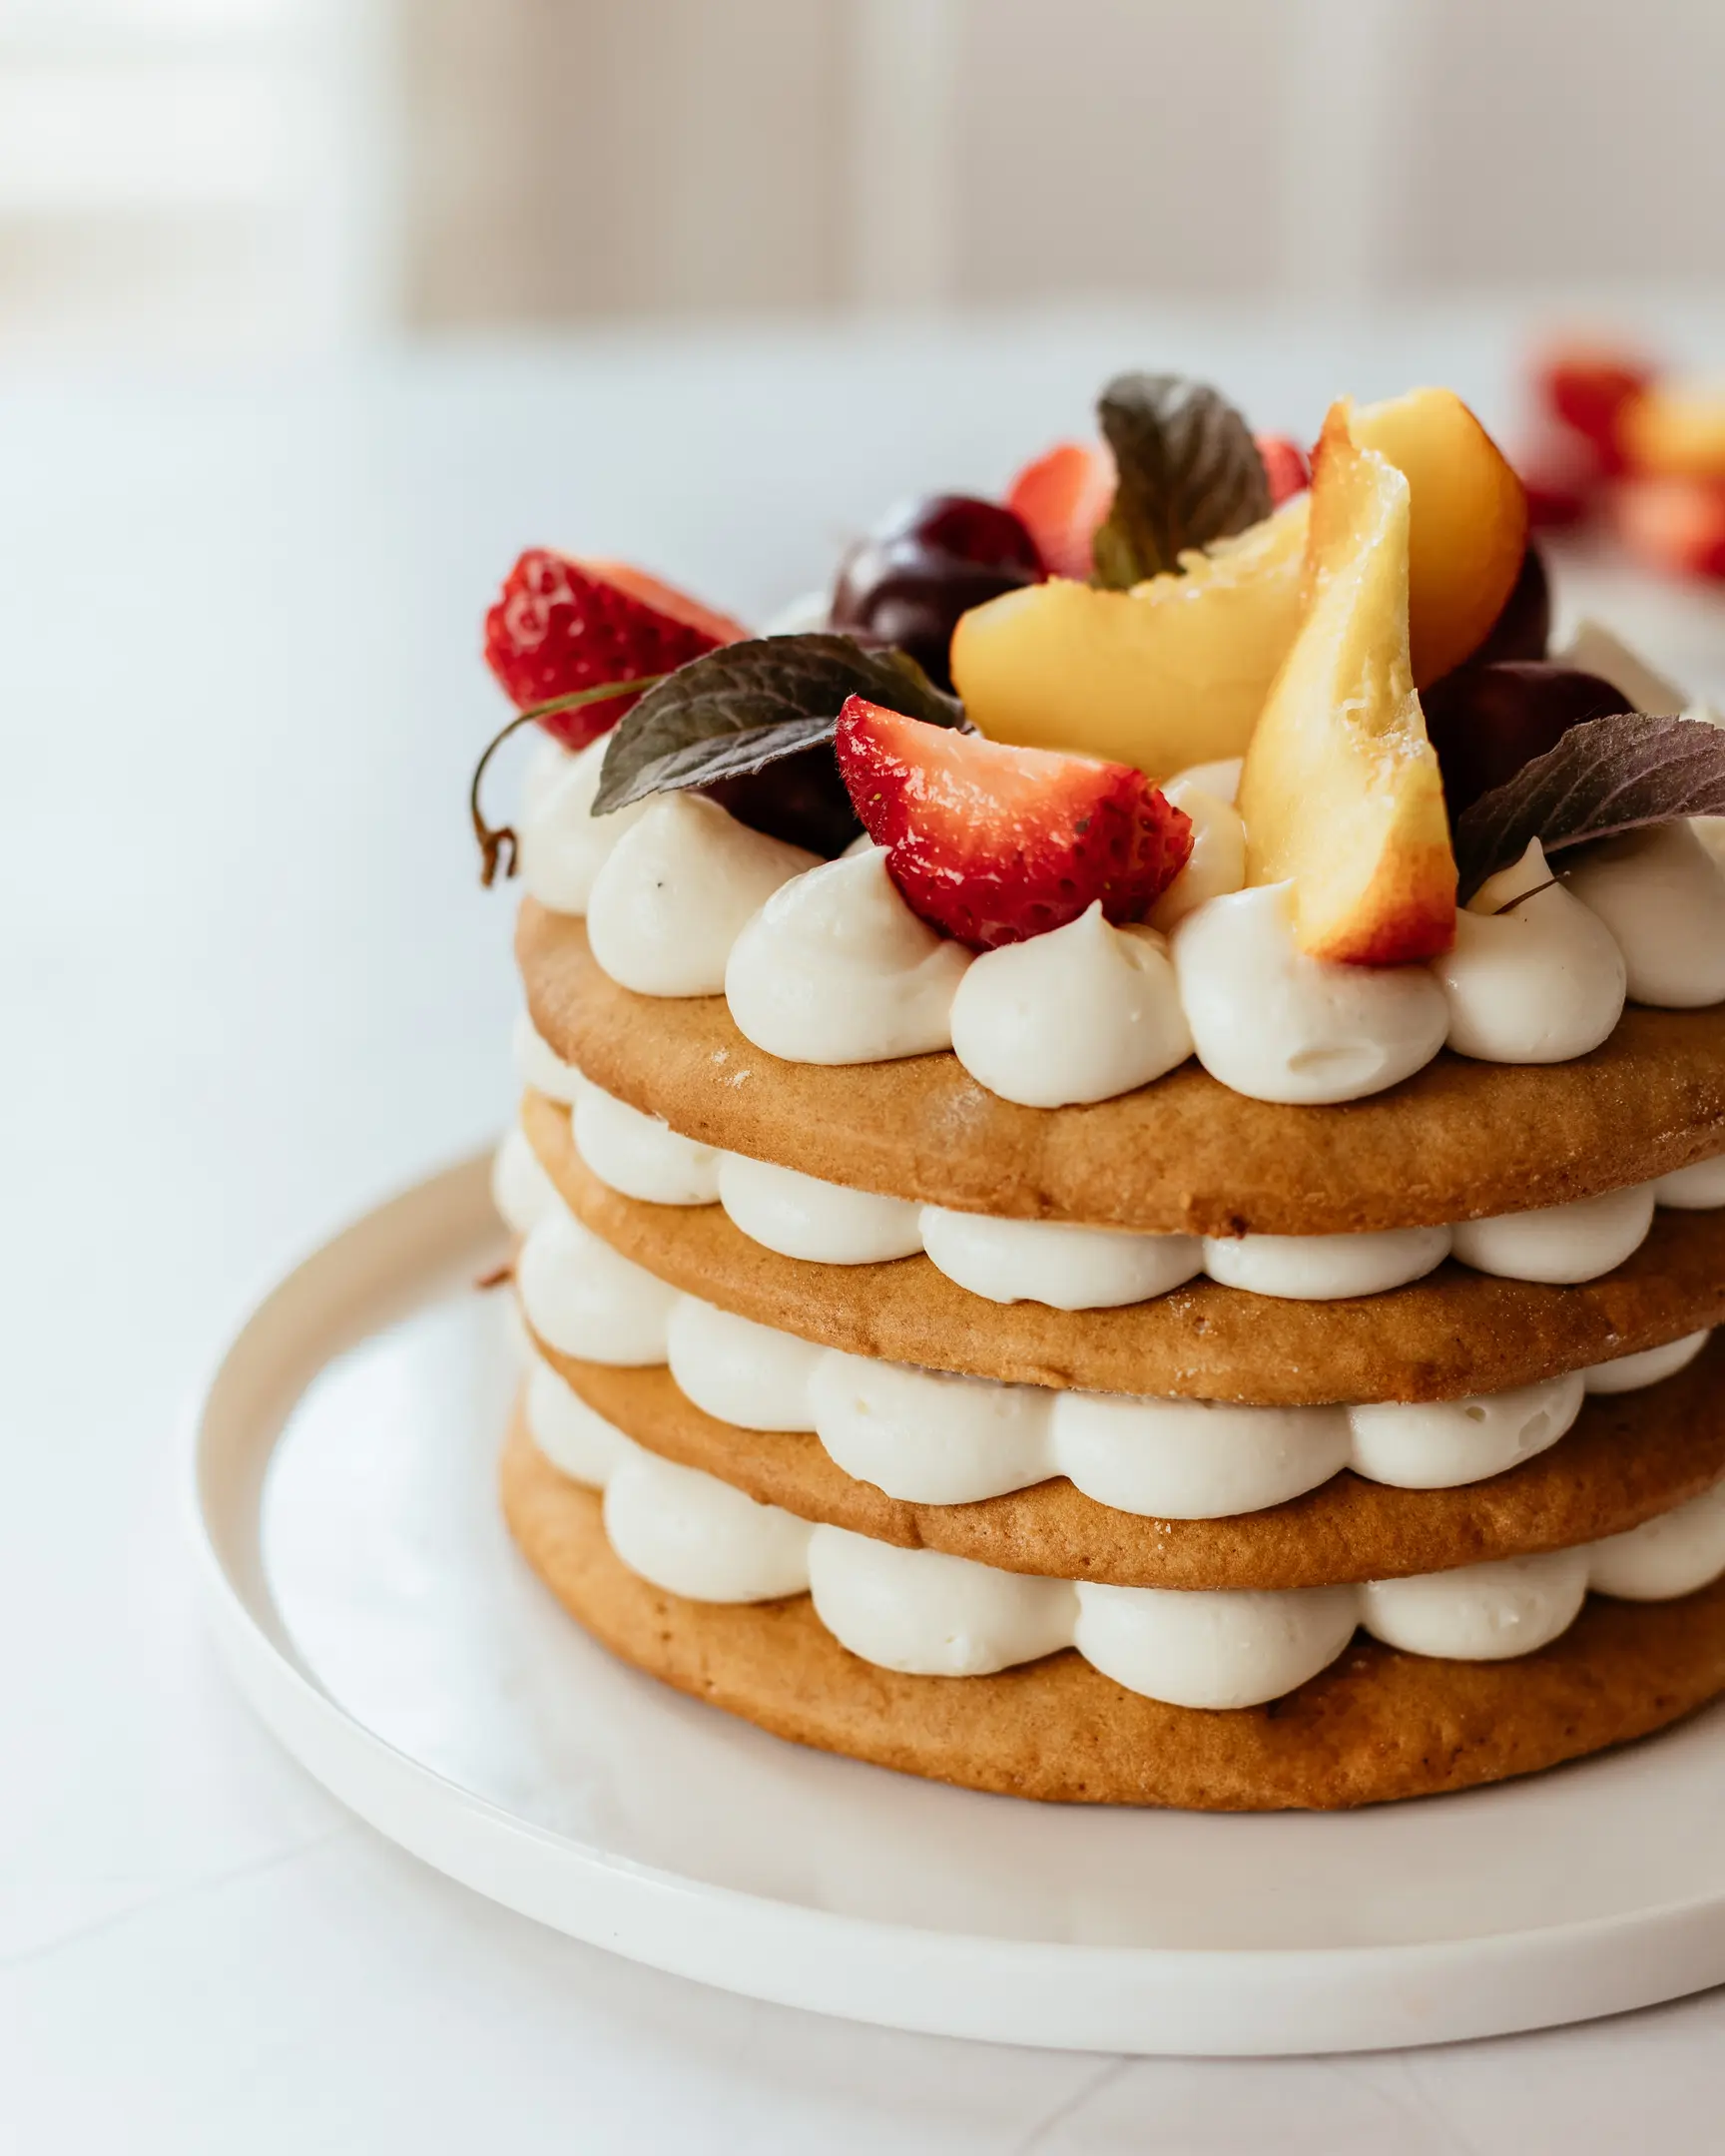 Layered honey cake. Layered honey cake decorated with berries stands on a plate.